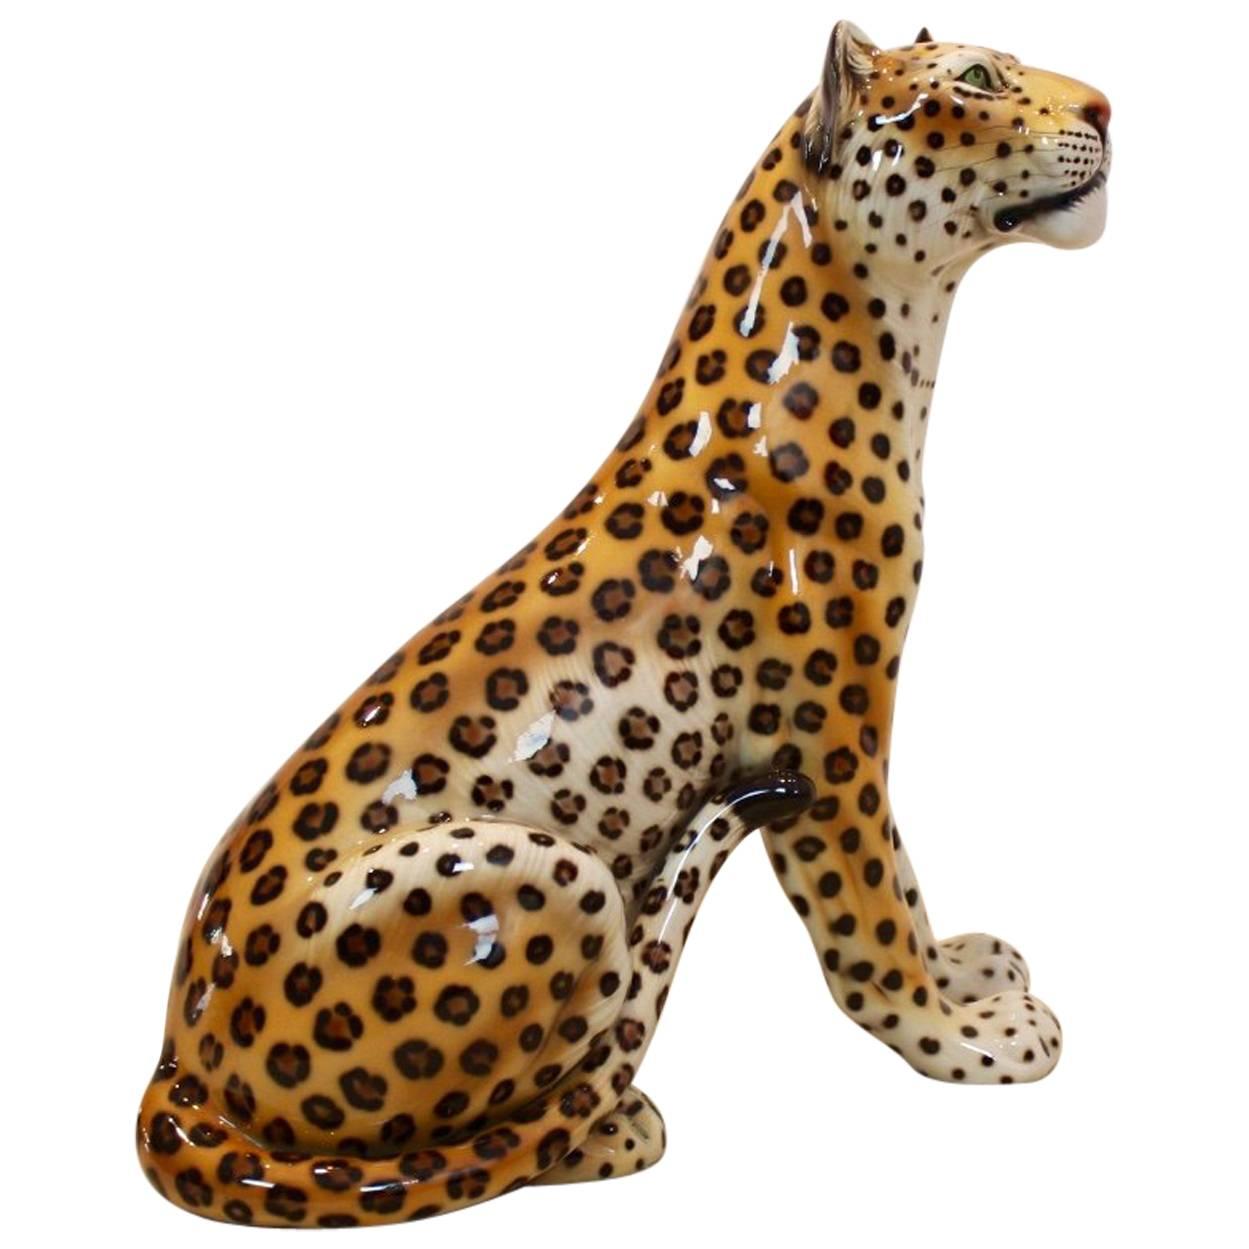 Large Hand-Painted Porcelain Leopard Sculpture by Ronzan, Italy 